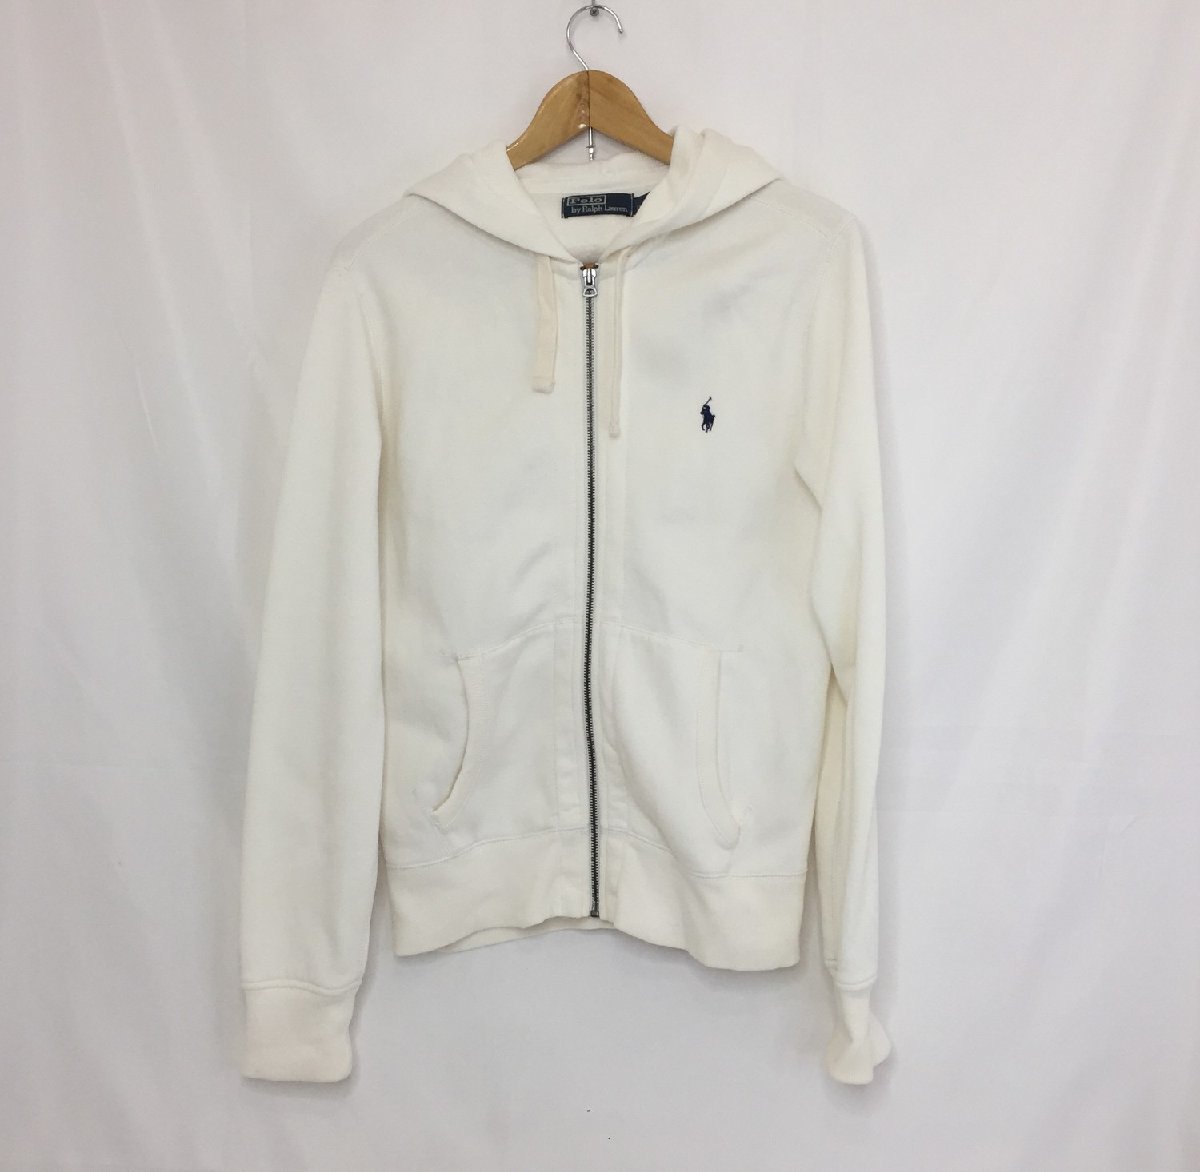 Polo by Ralph Lauren Polo Ralph Lauren one Point embroidery Zip up Parker size :S color : white lady's unisex 